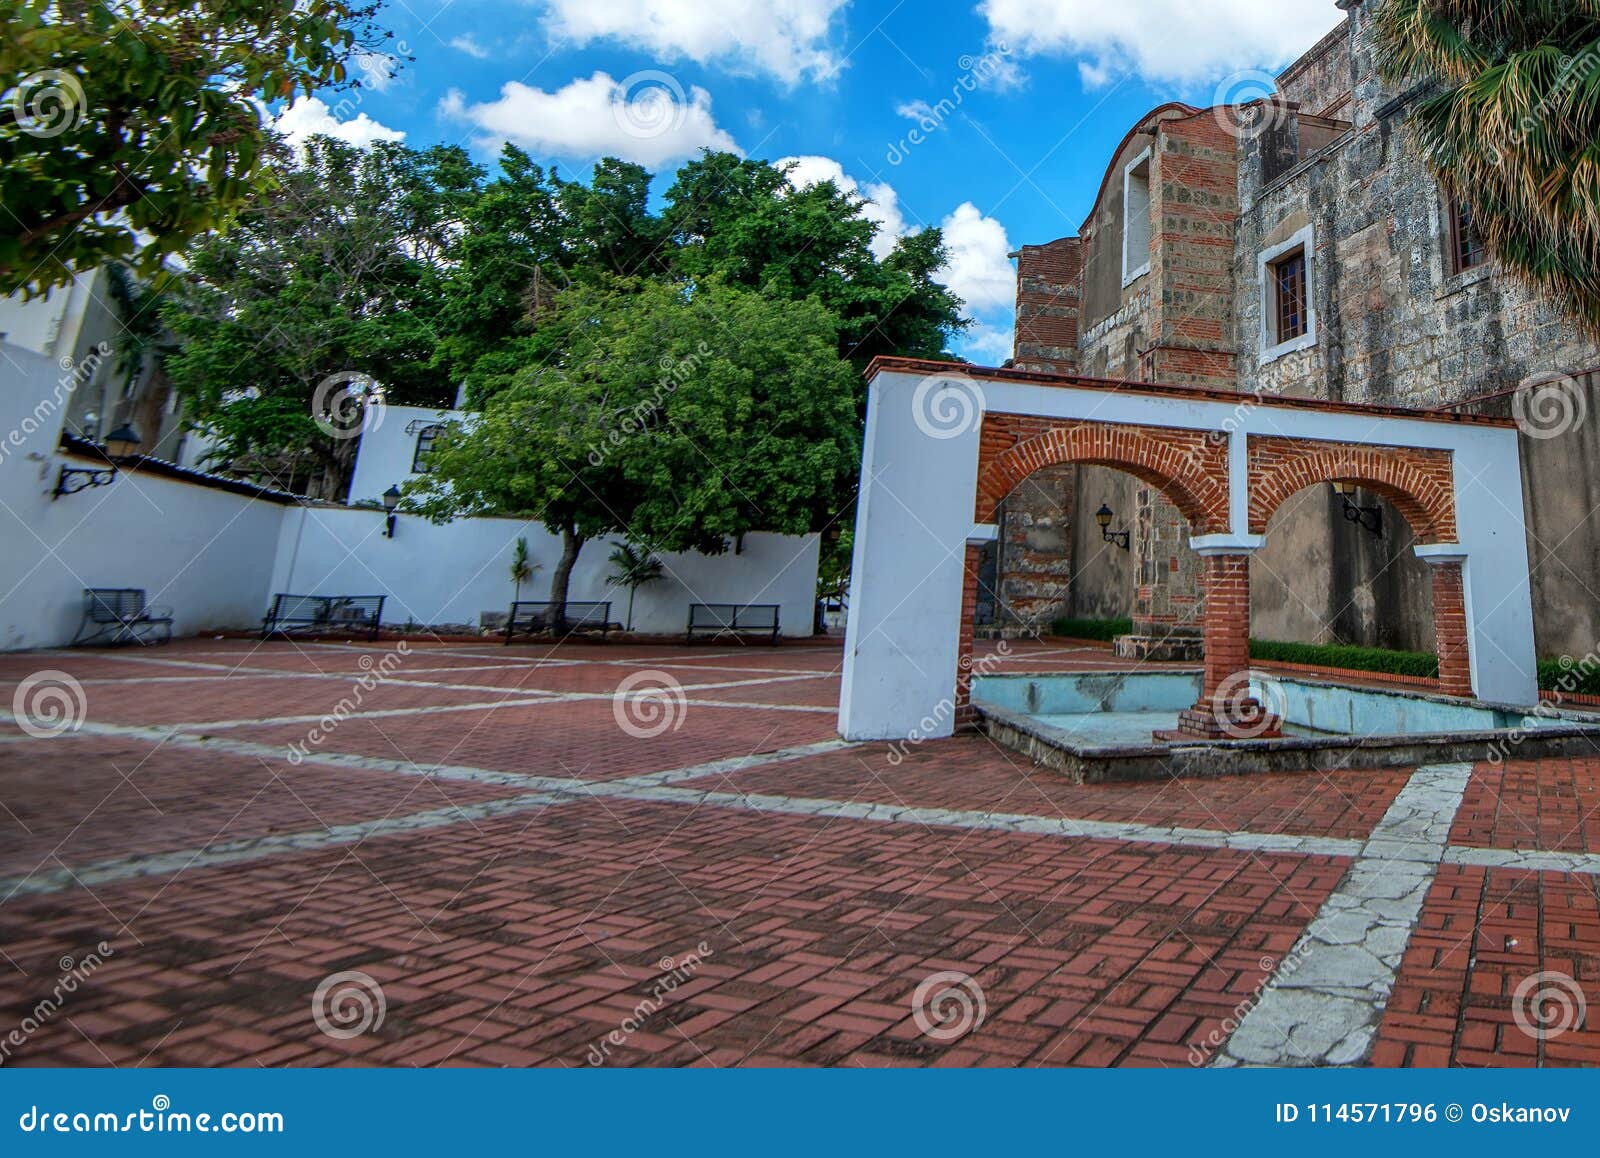 archway in street of zona colonial, santo domingo